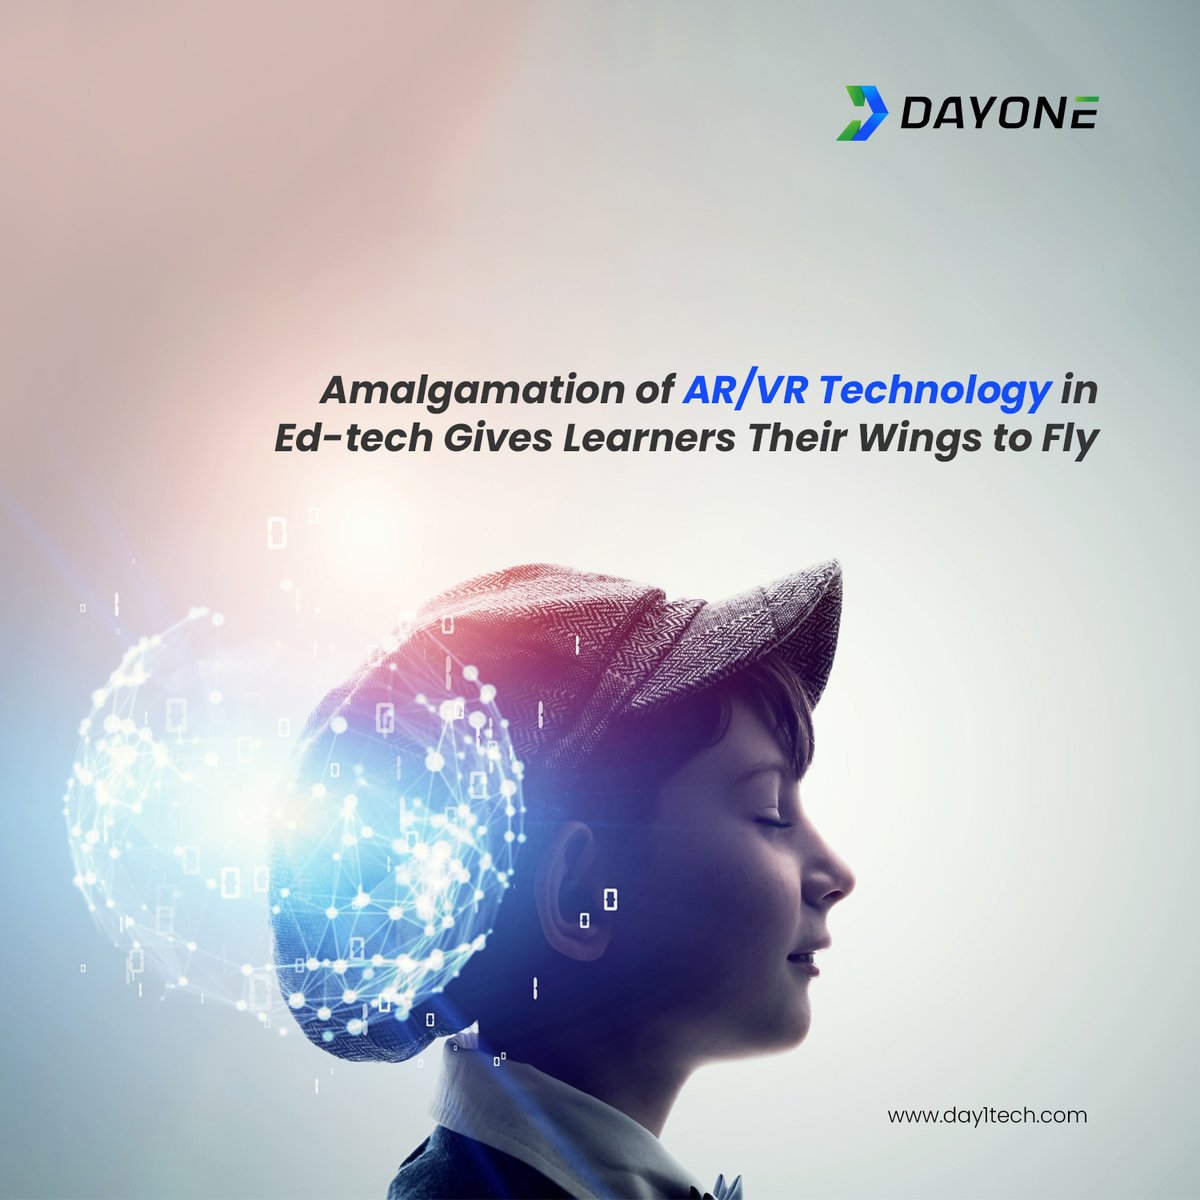 Improvising a smart learning environment for the savvy-learners should be kept as a top prerogative by the educational industries. This #childrensday, splurge on Verve360 equipped with AR/VR technology to take a conventional learning style a notch higher. #appdevelopment #dayone